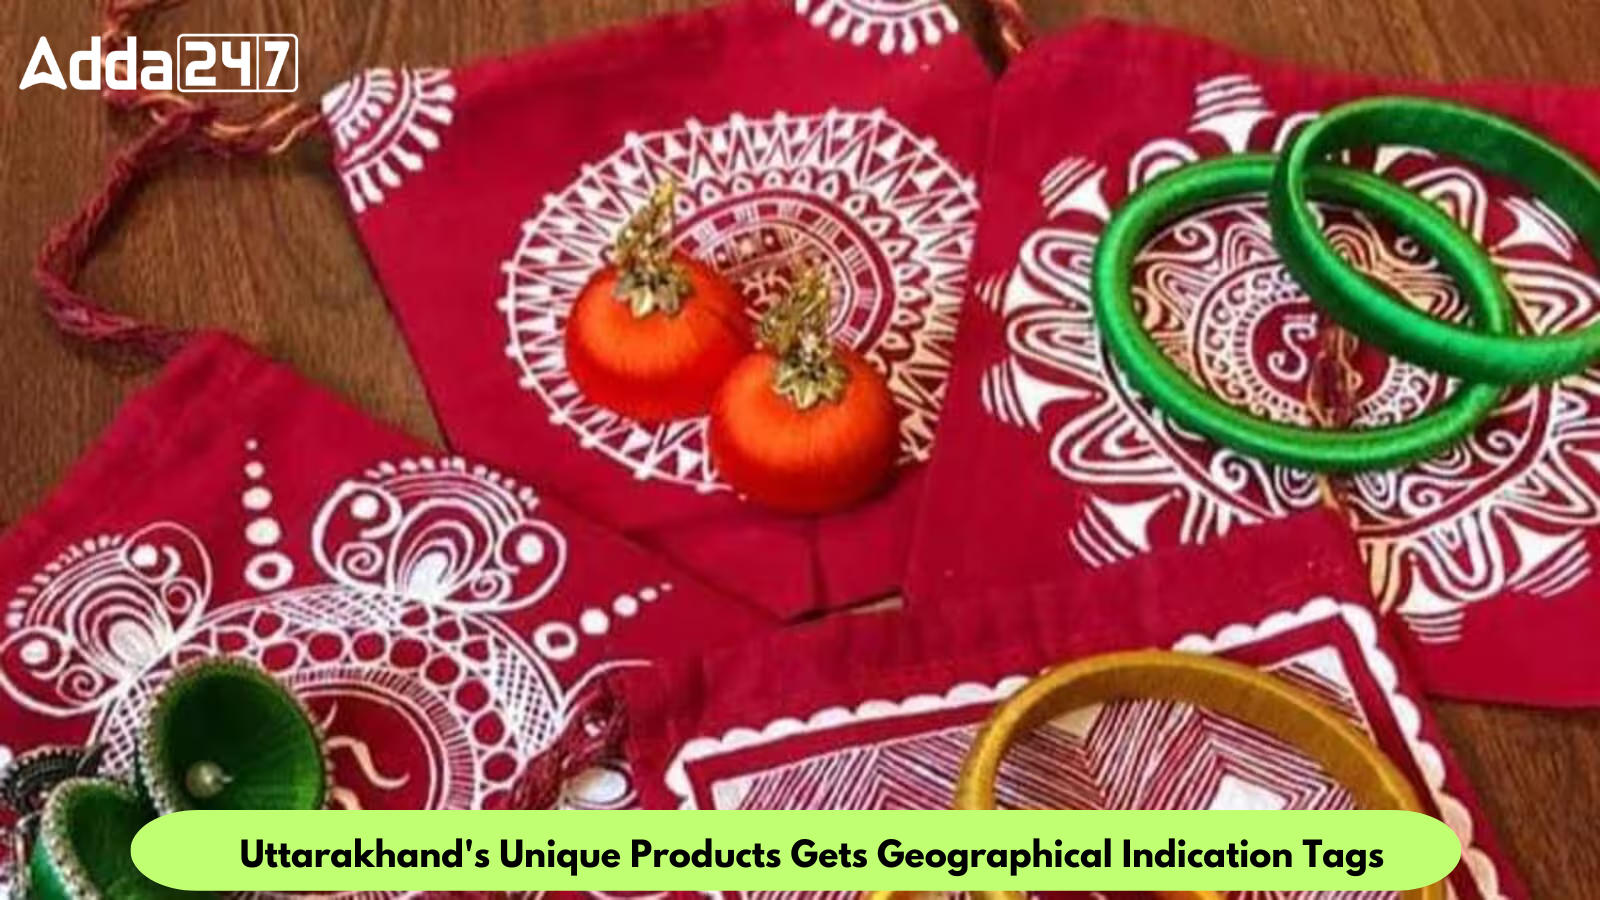 Uttarakhand's Unique Products Gets Geographical Indication Tags